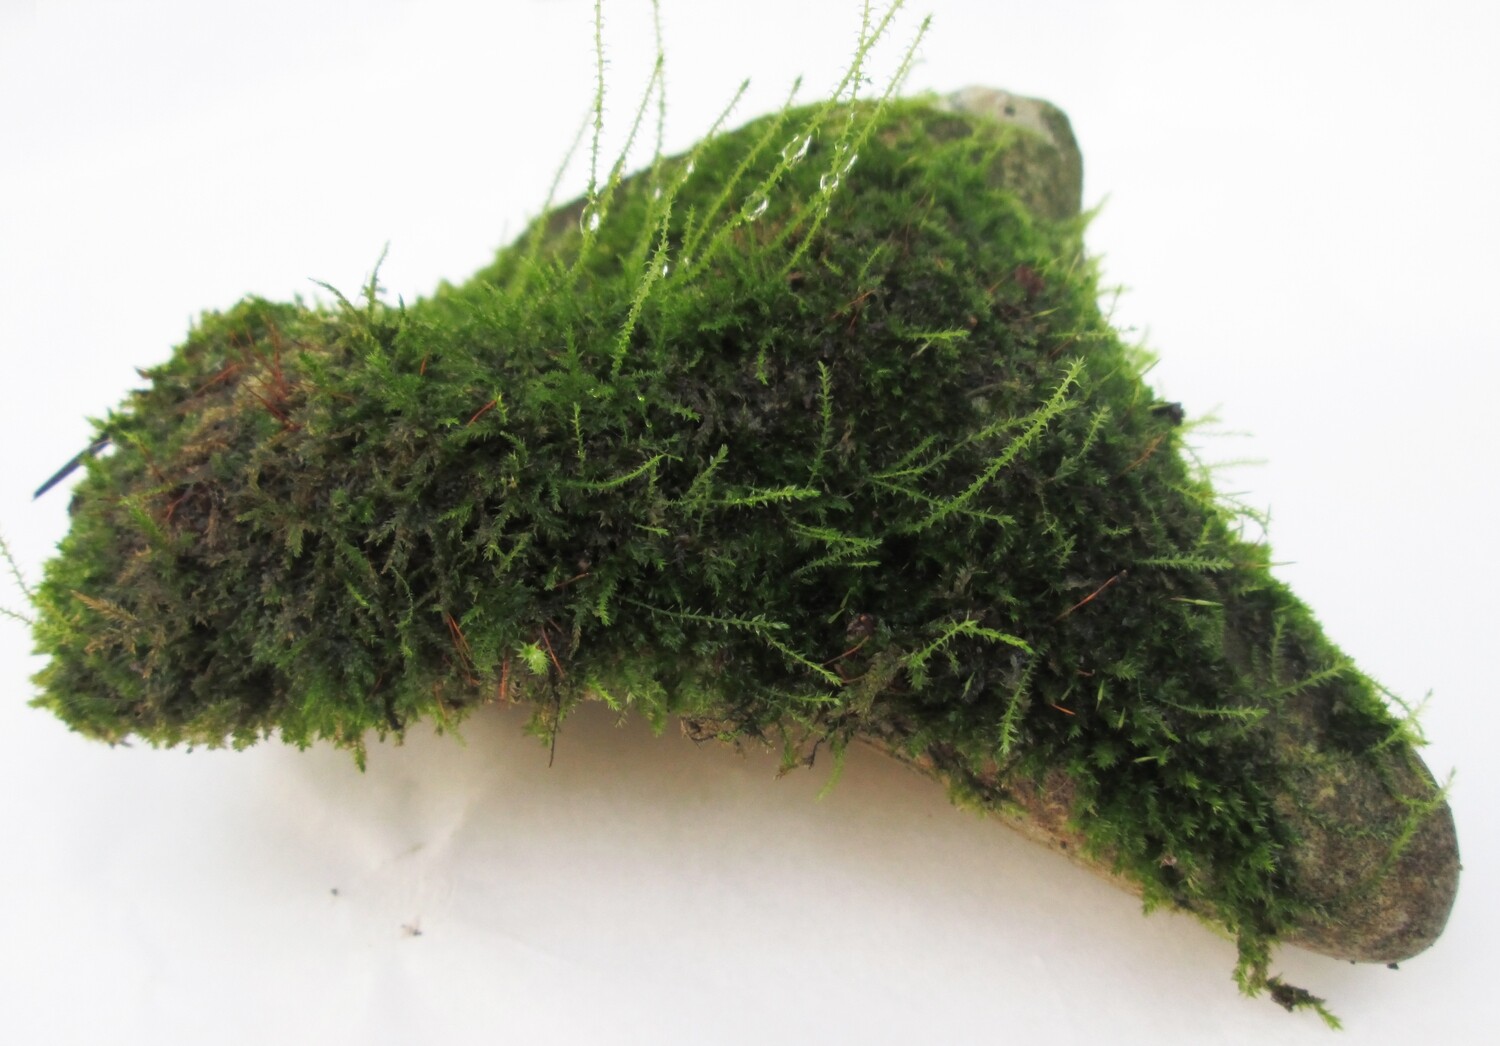 Premium Live Fresh Living Green Moss Growing on LOG Mossy Covered